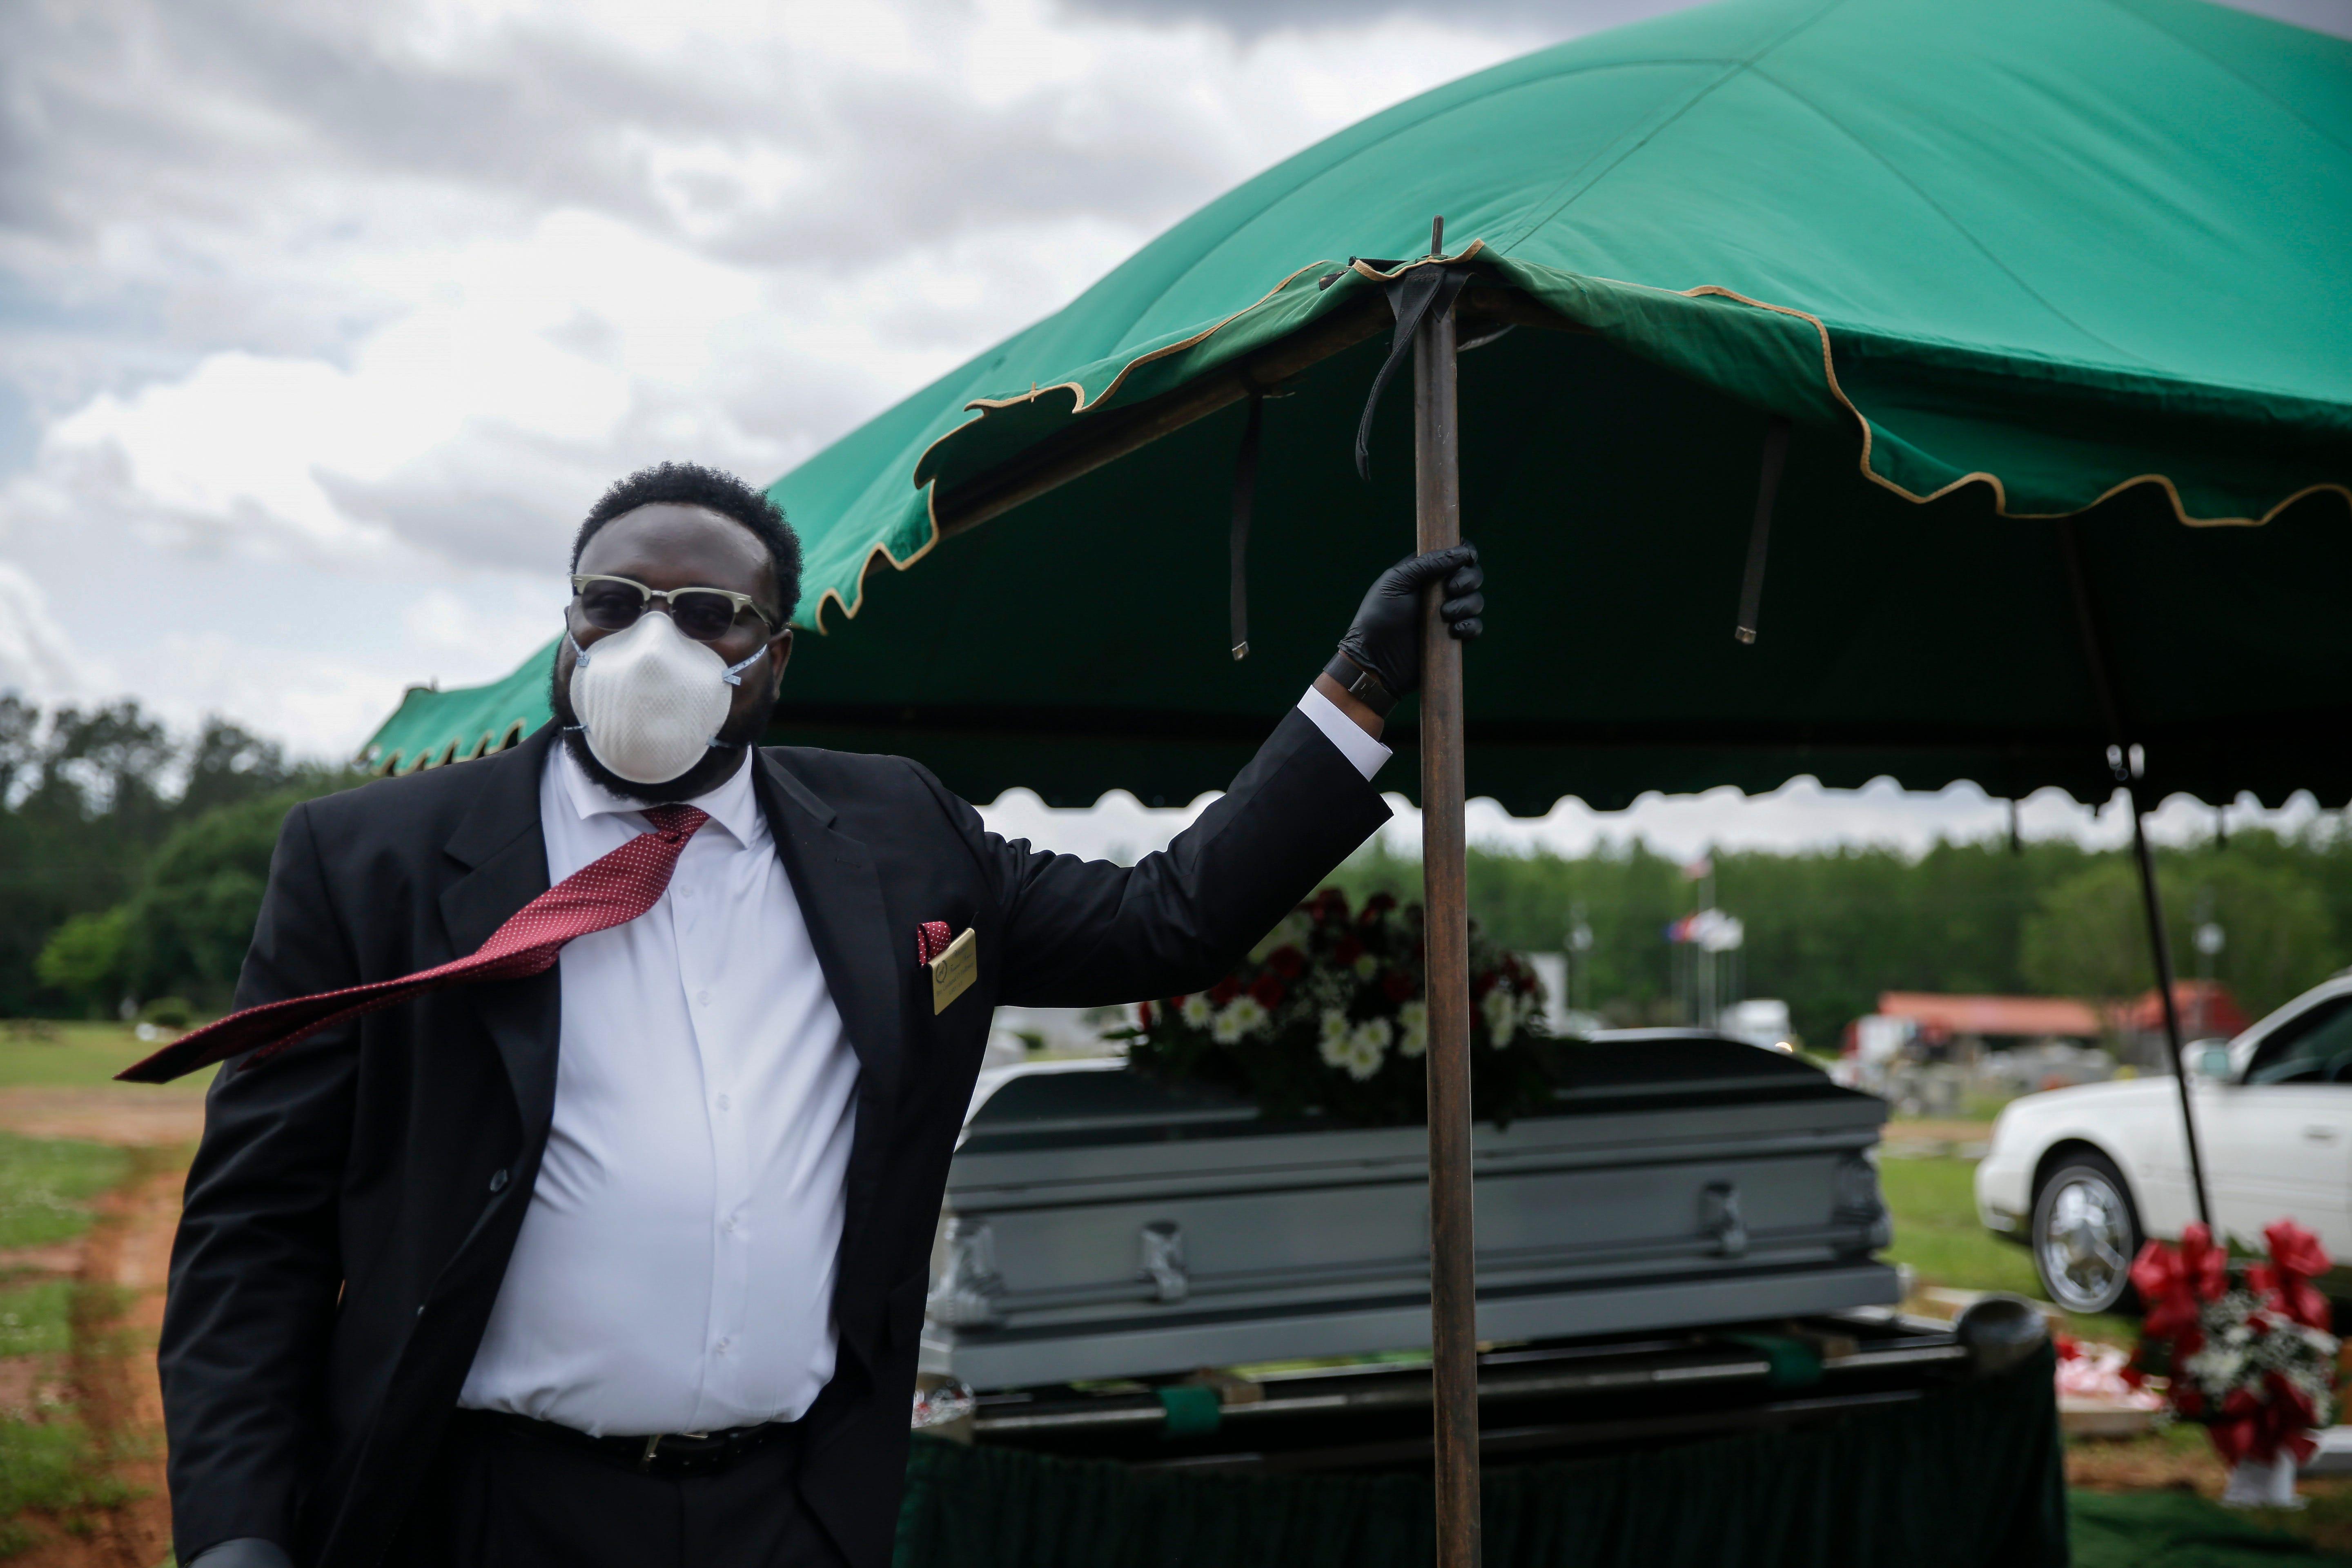 Cordarial O. Holloway wears a protective mask as his tie blows in the wind after a funeral at Cedar Hill Cemetery, on Saturday, April 18, 2020, in Dawson, Ga. By nearly every measure, COVID-19 patients in this patch of Georgia are faring worse than almost anywhere else in the country, according to researchers at Emory University in Atlanta who found that the virus has been more deadly in places with high social vulnerability indicators, like poverty and low-income households.